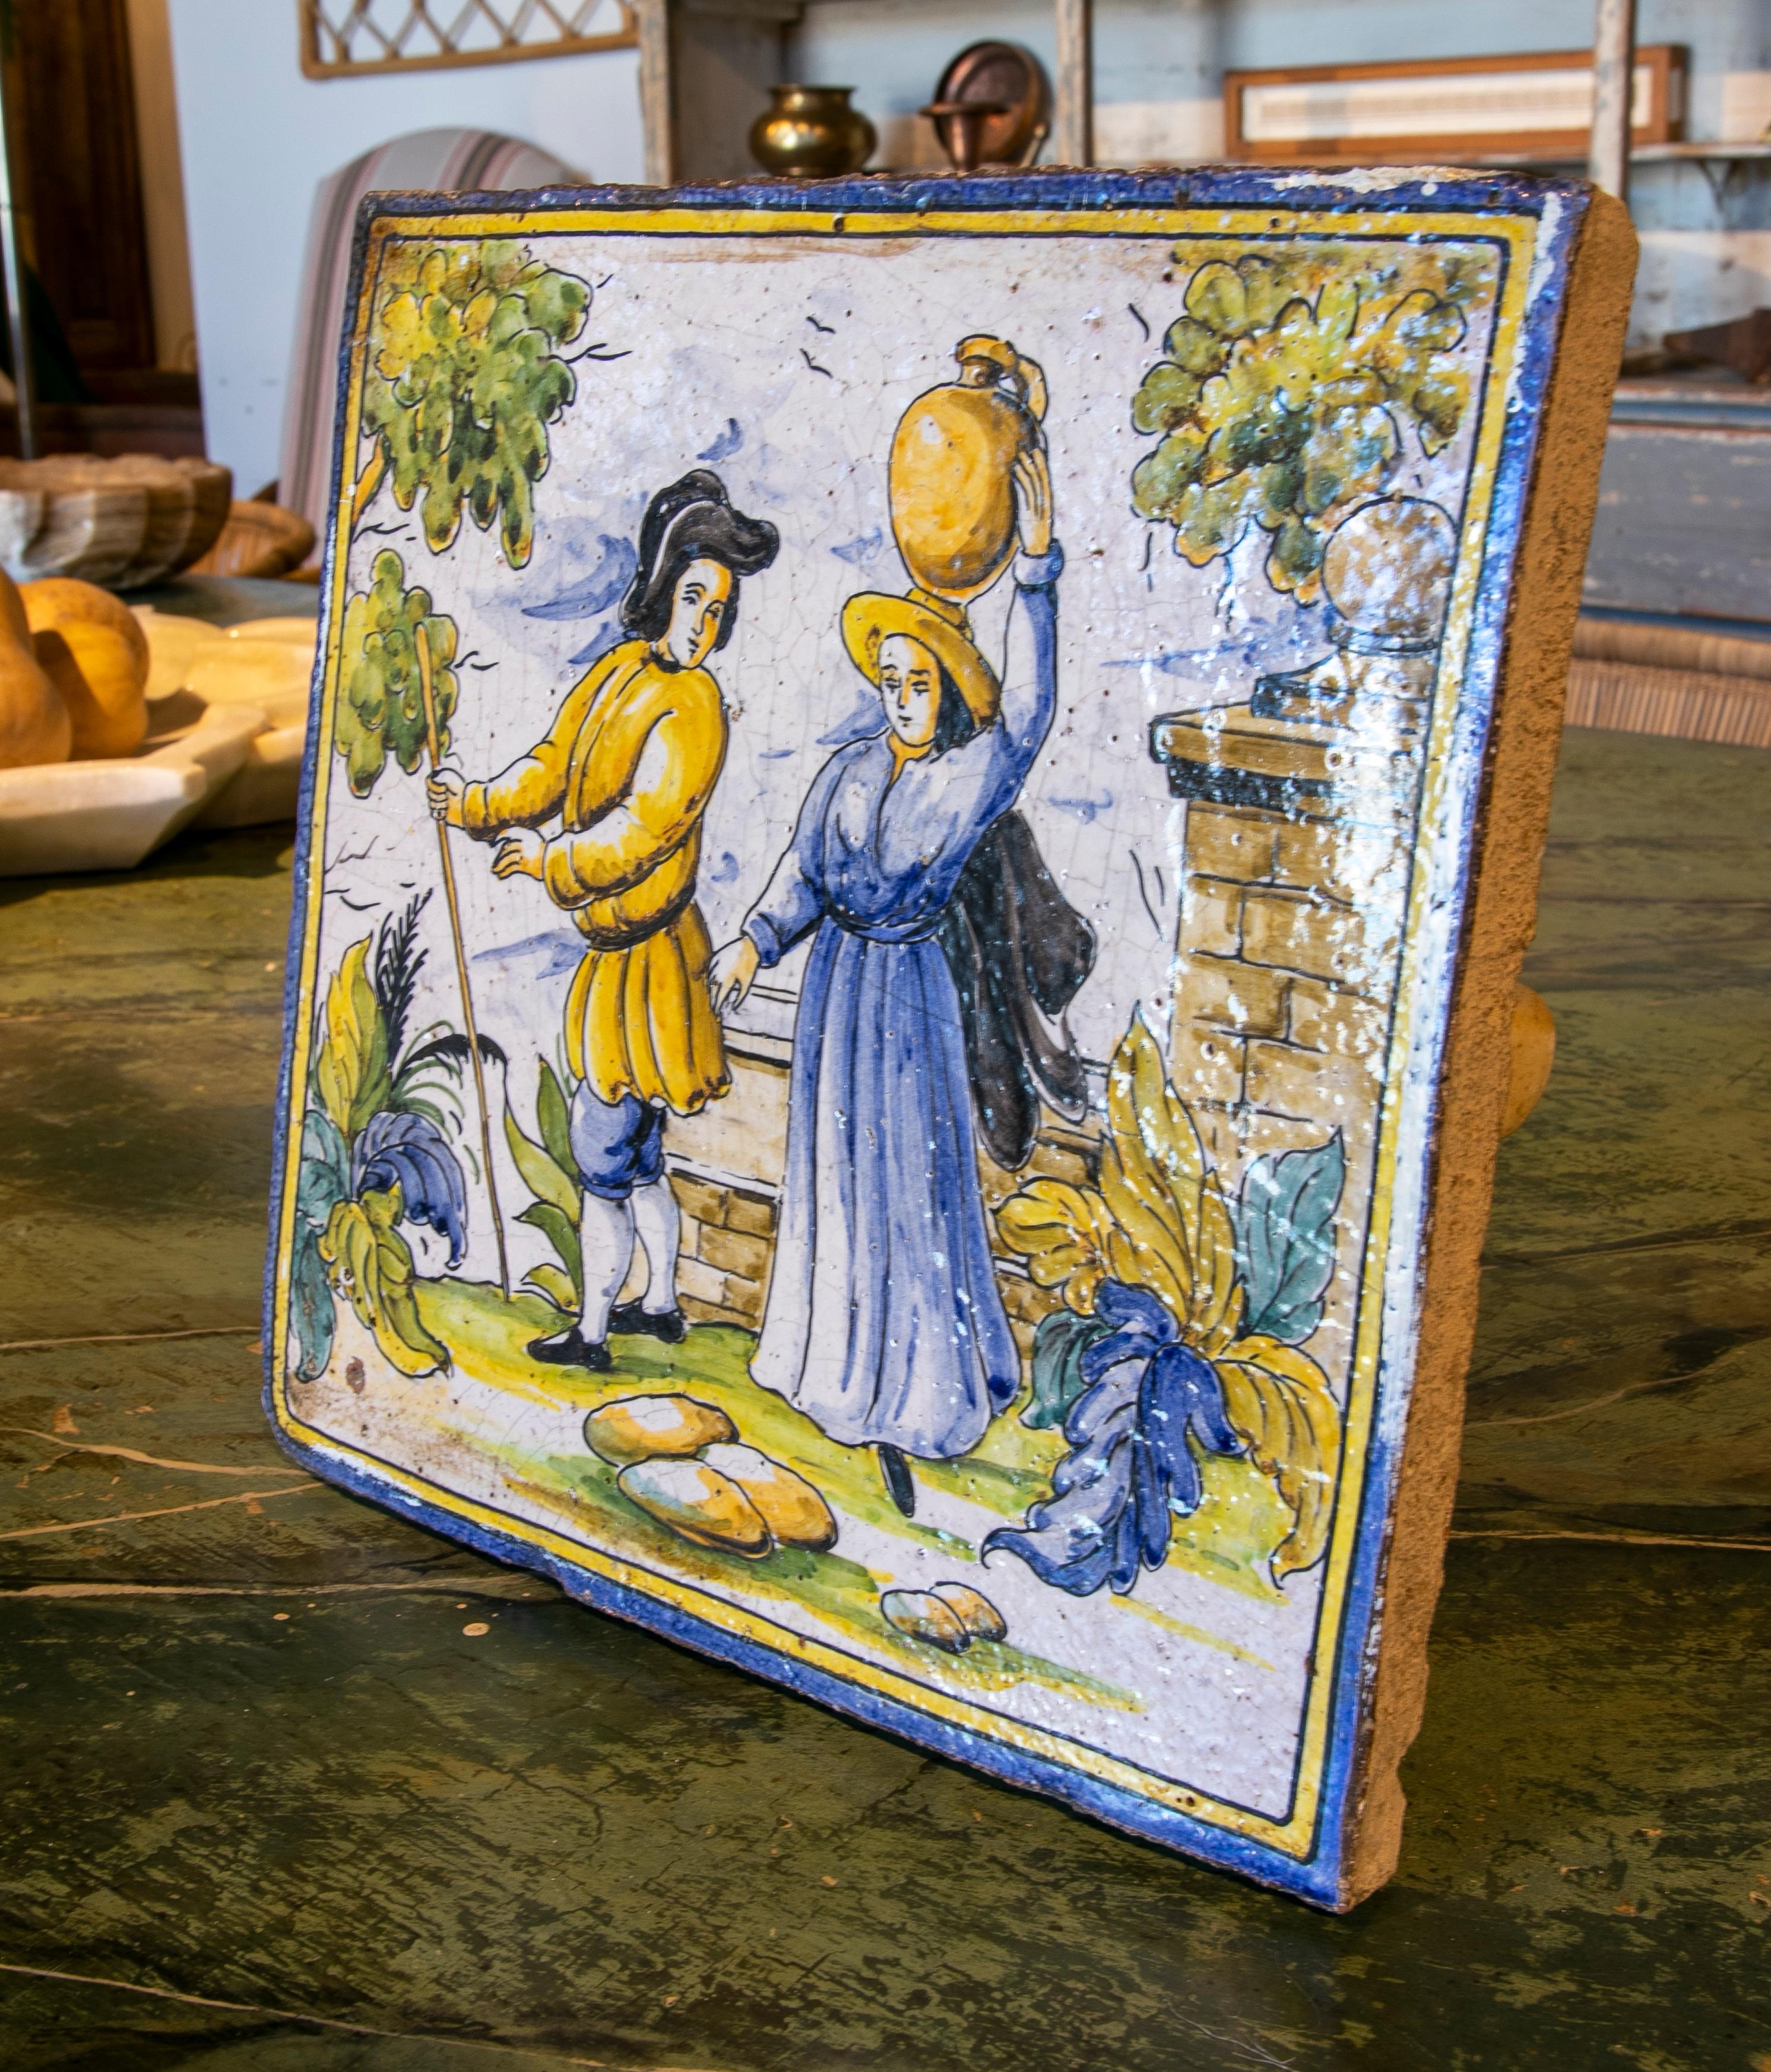 1970s Spanish hand painted glazed ceramic tile with people scene.